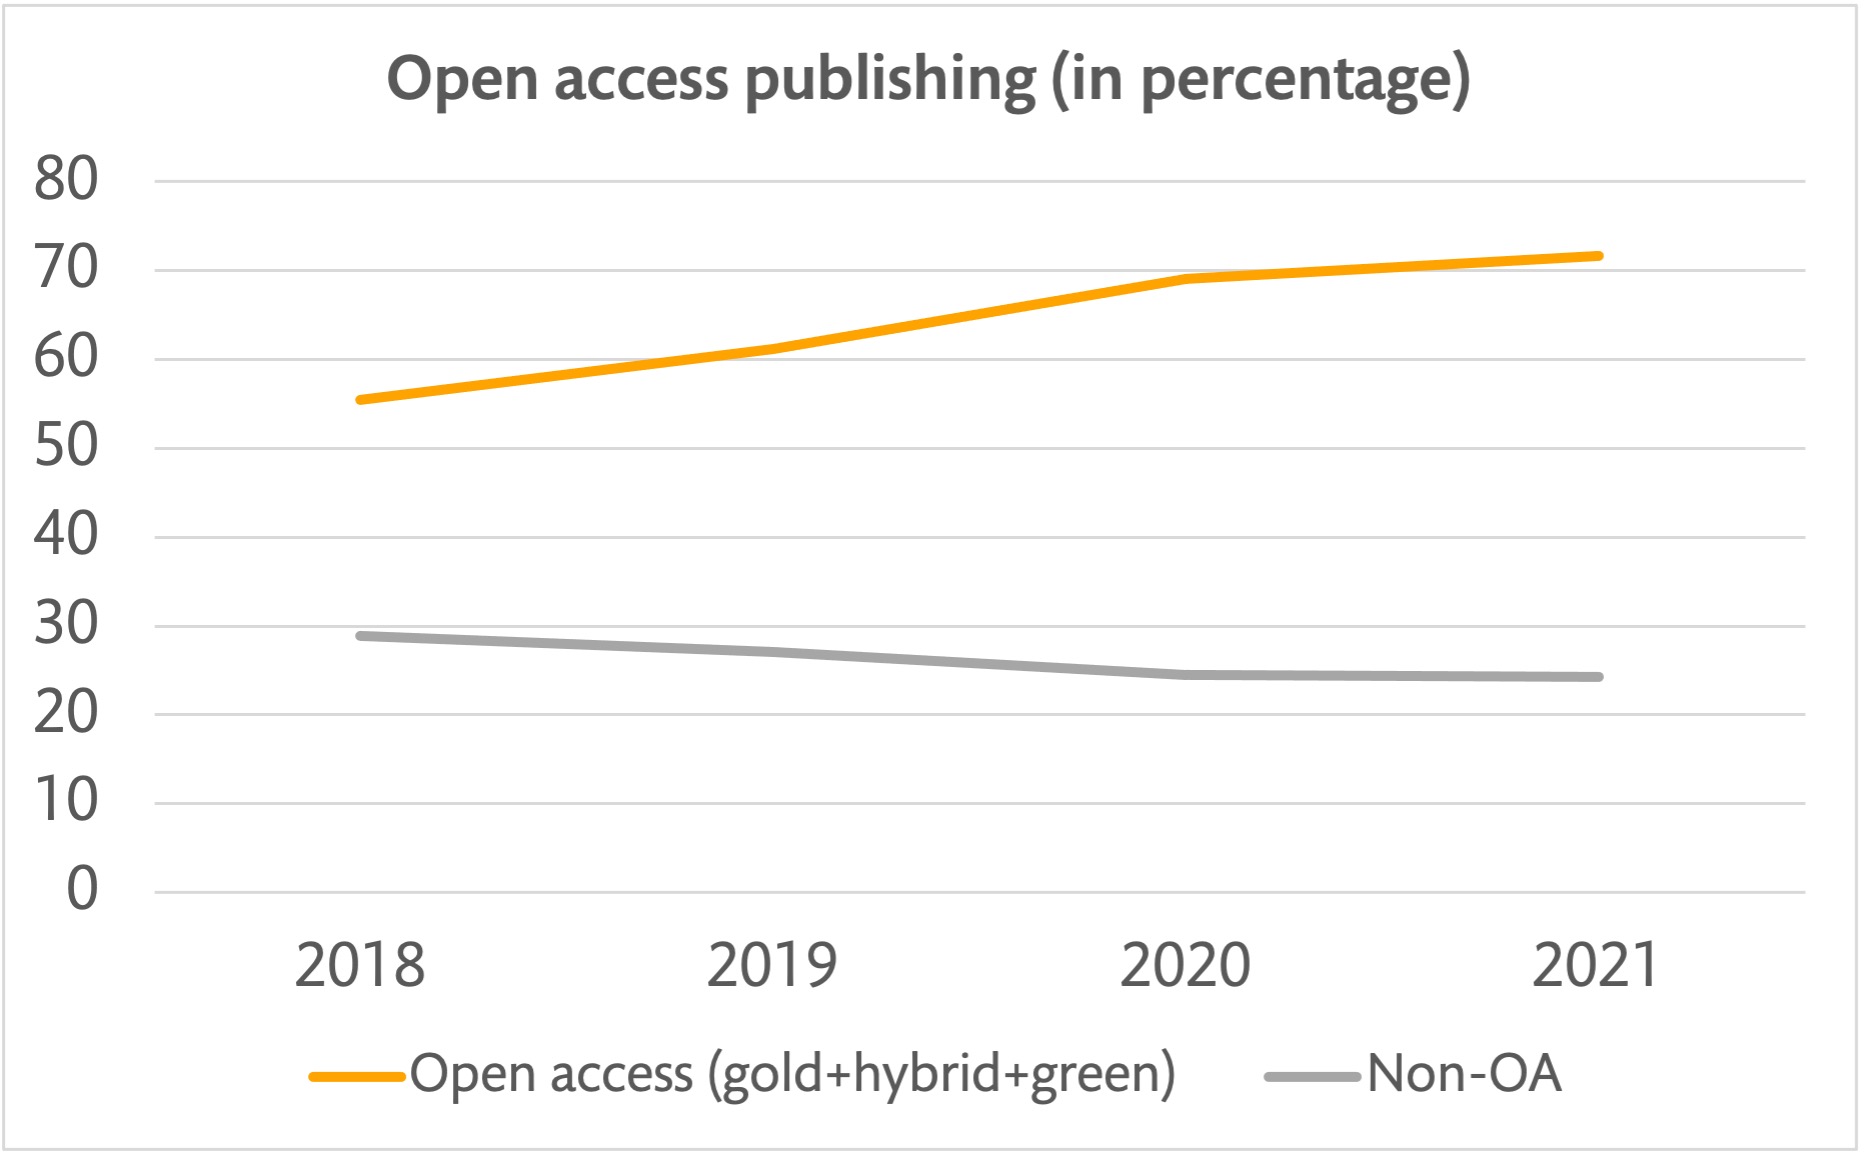 Chart showing an increase of open access publishing (gold, hybrid and green) at KI from 2018 (around 55%) to 2021 (around 70%, preliminary).